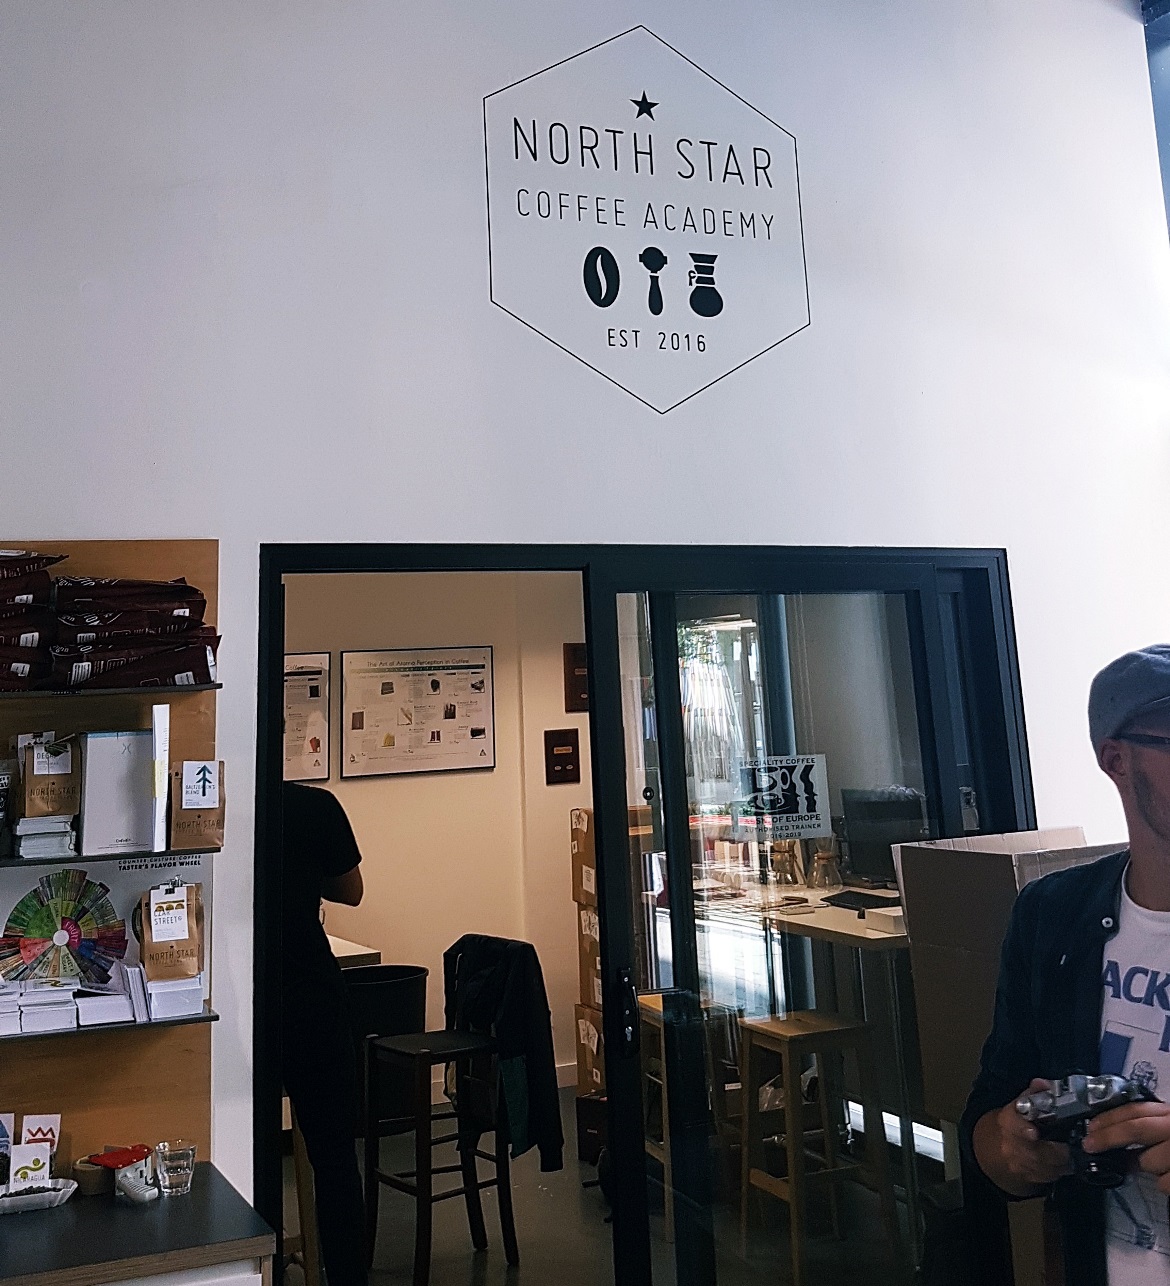 Entrance to North Star Coffee Academy - Review of North Star Coffee Shop by BeckyBecky Blogs